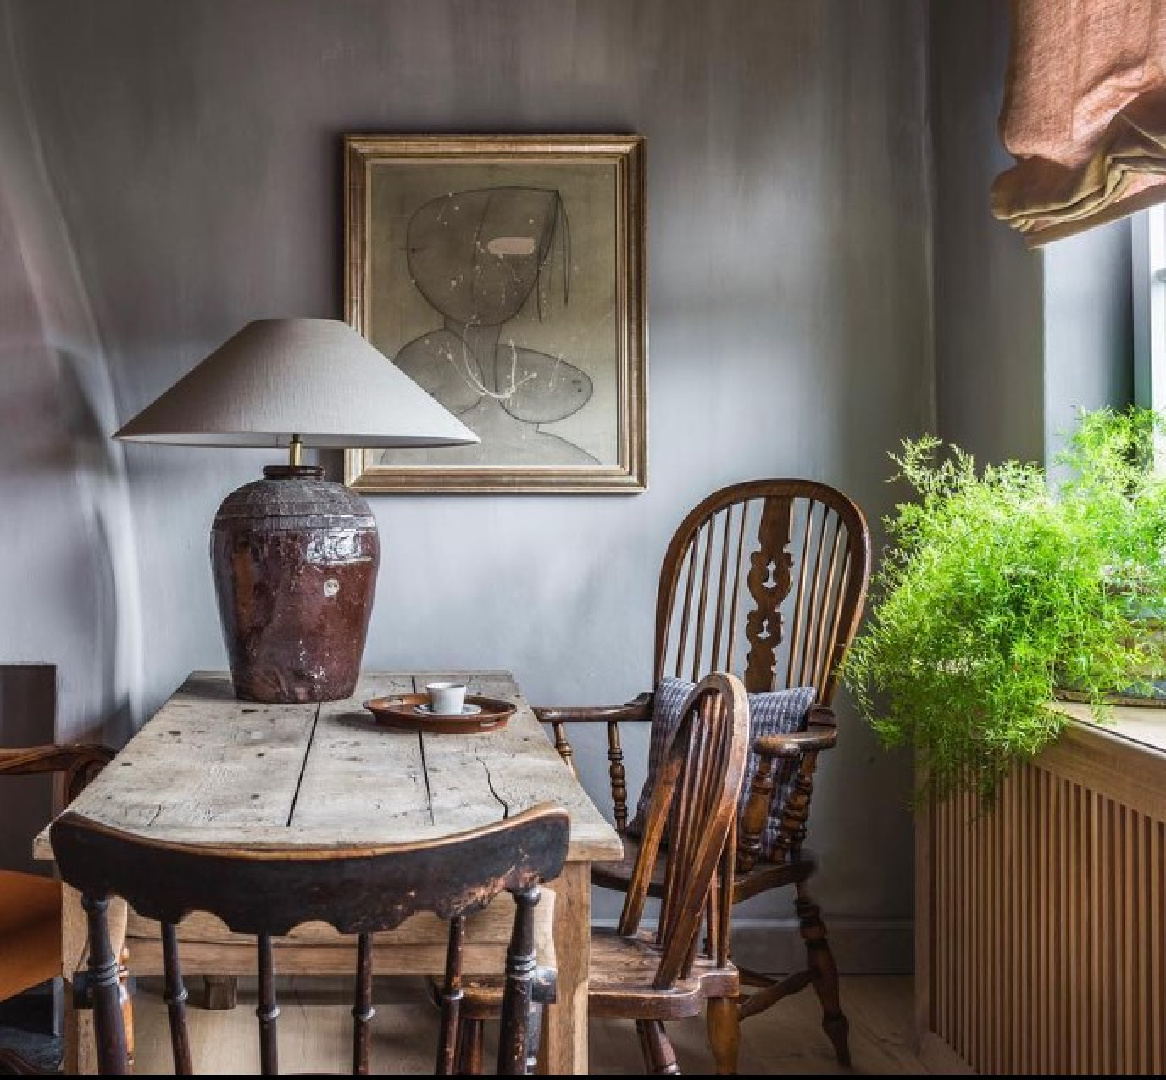 Odavaere - Belgian style elegant rustic interior with blue gray walls and antiques. #oldworldstyle #europeancountry #belgianstyle